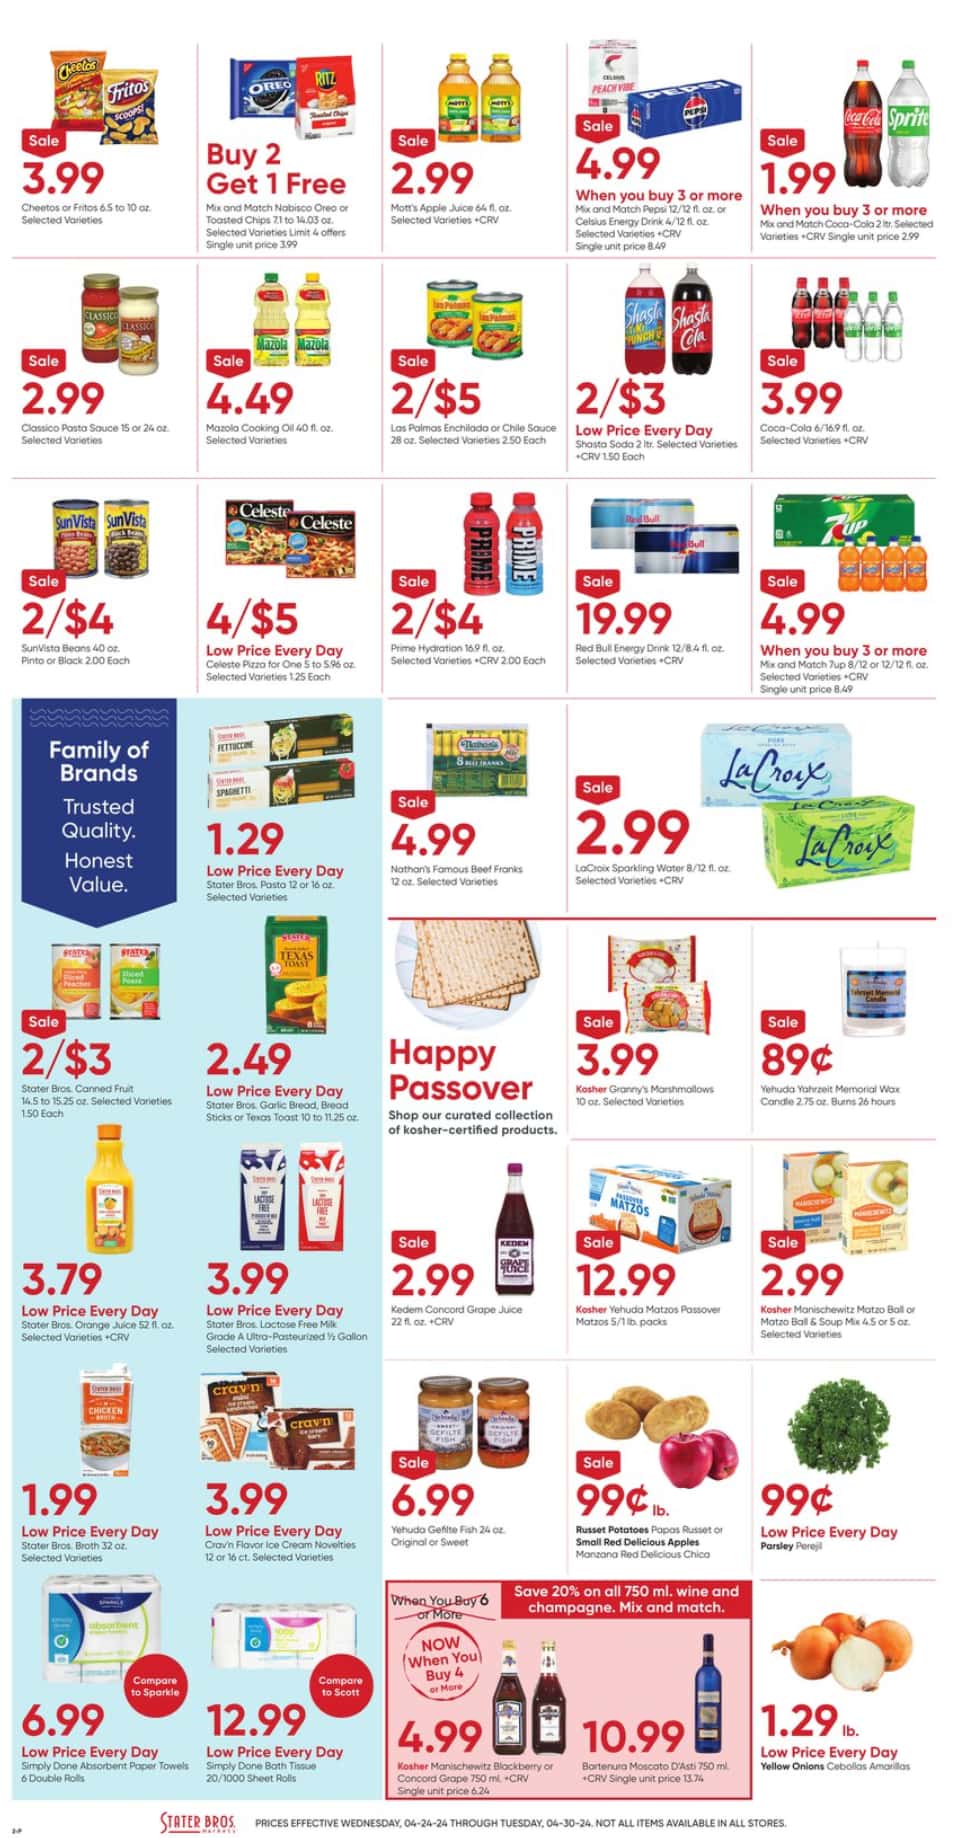 StaterBros_weekly_ad_042424_02